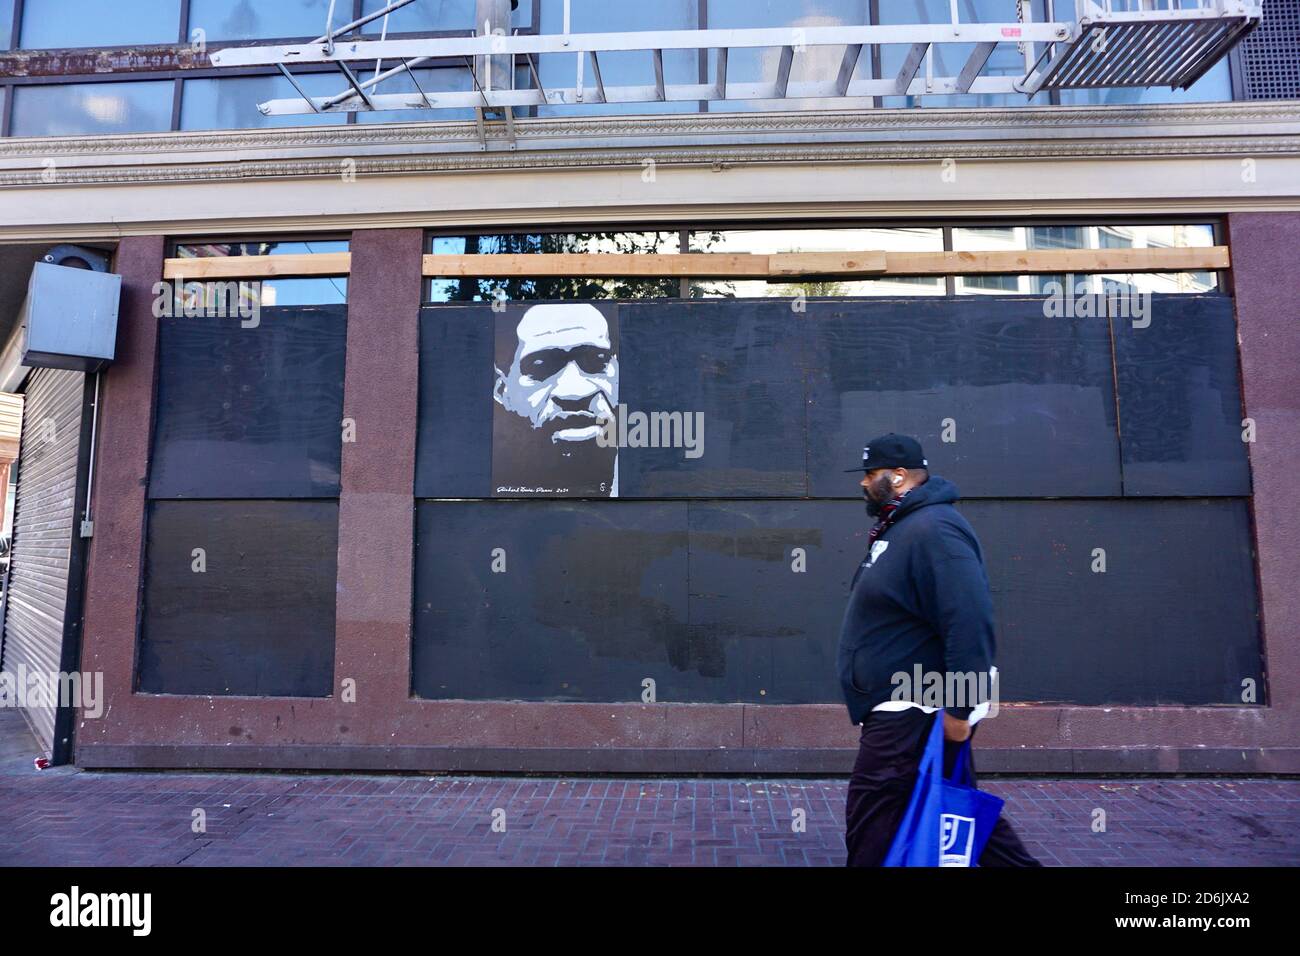 October 17, 2020. Painting of George Floyd's face, Black Lives Matter street art, on boarded up windows. Market Street, San Francisco, California, USA. Stock Photo